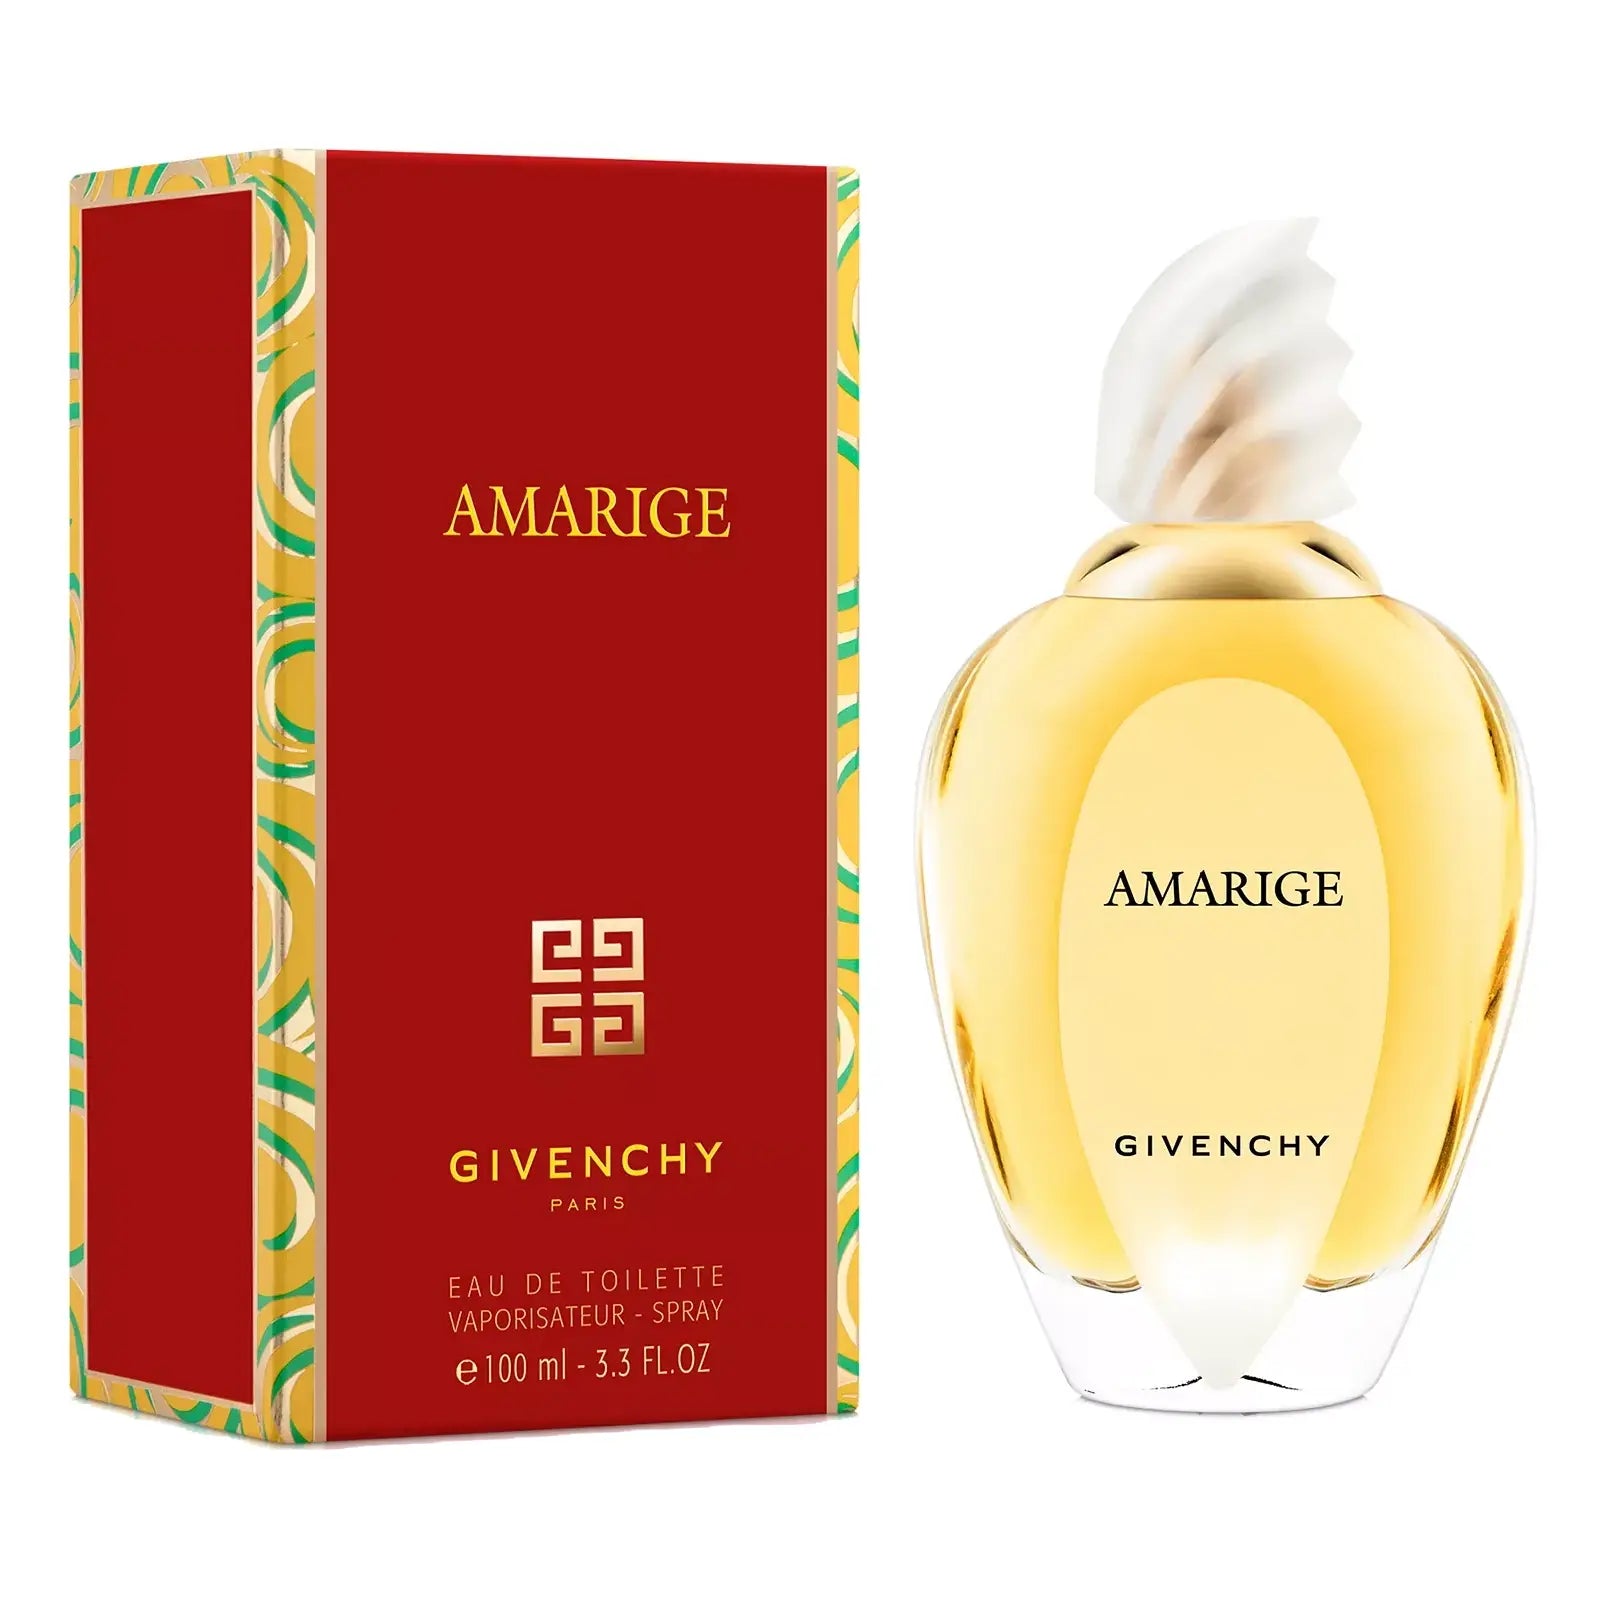 Amarige by Givenchy EDT 3.3 oz